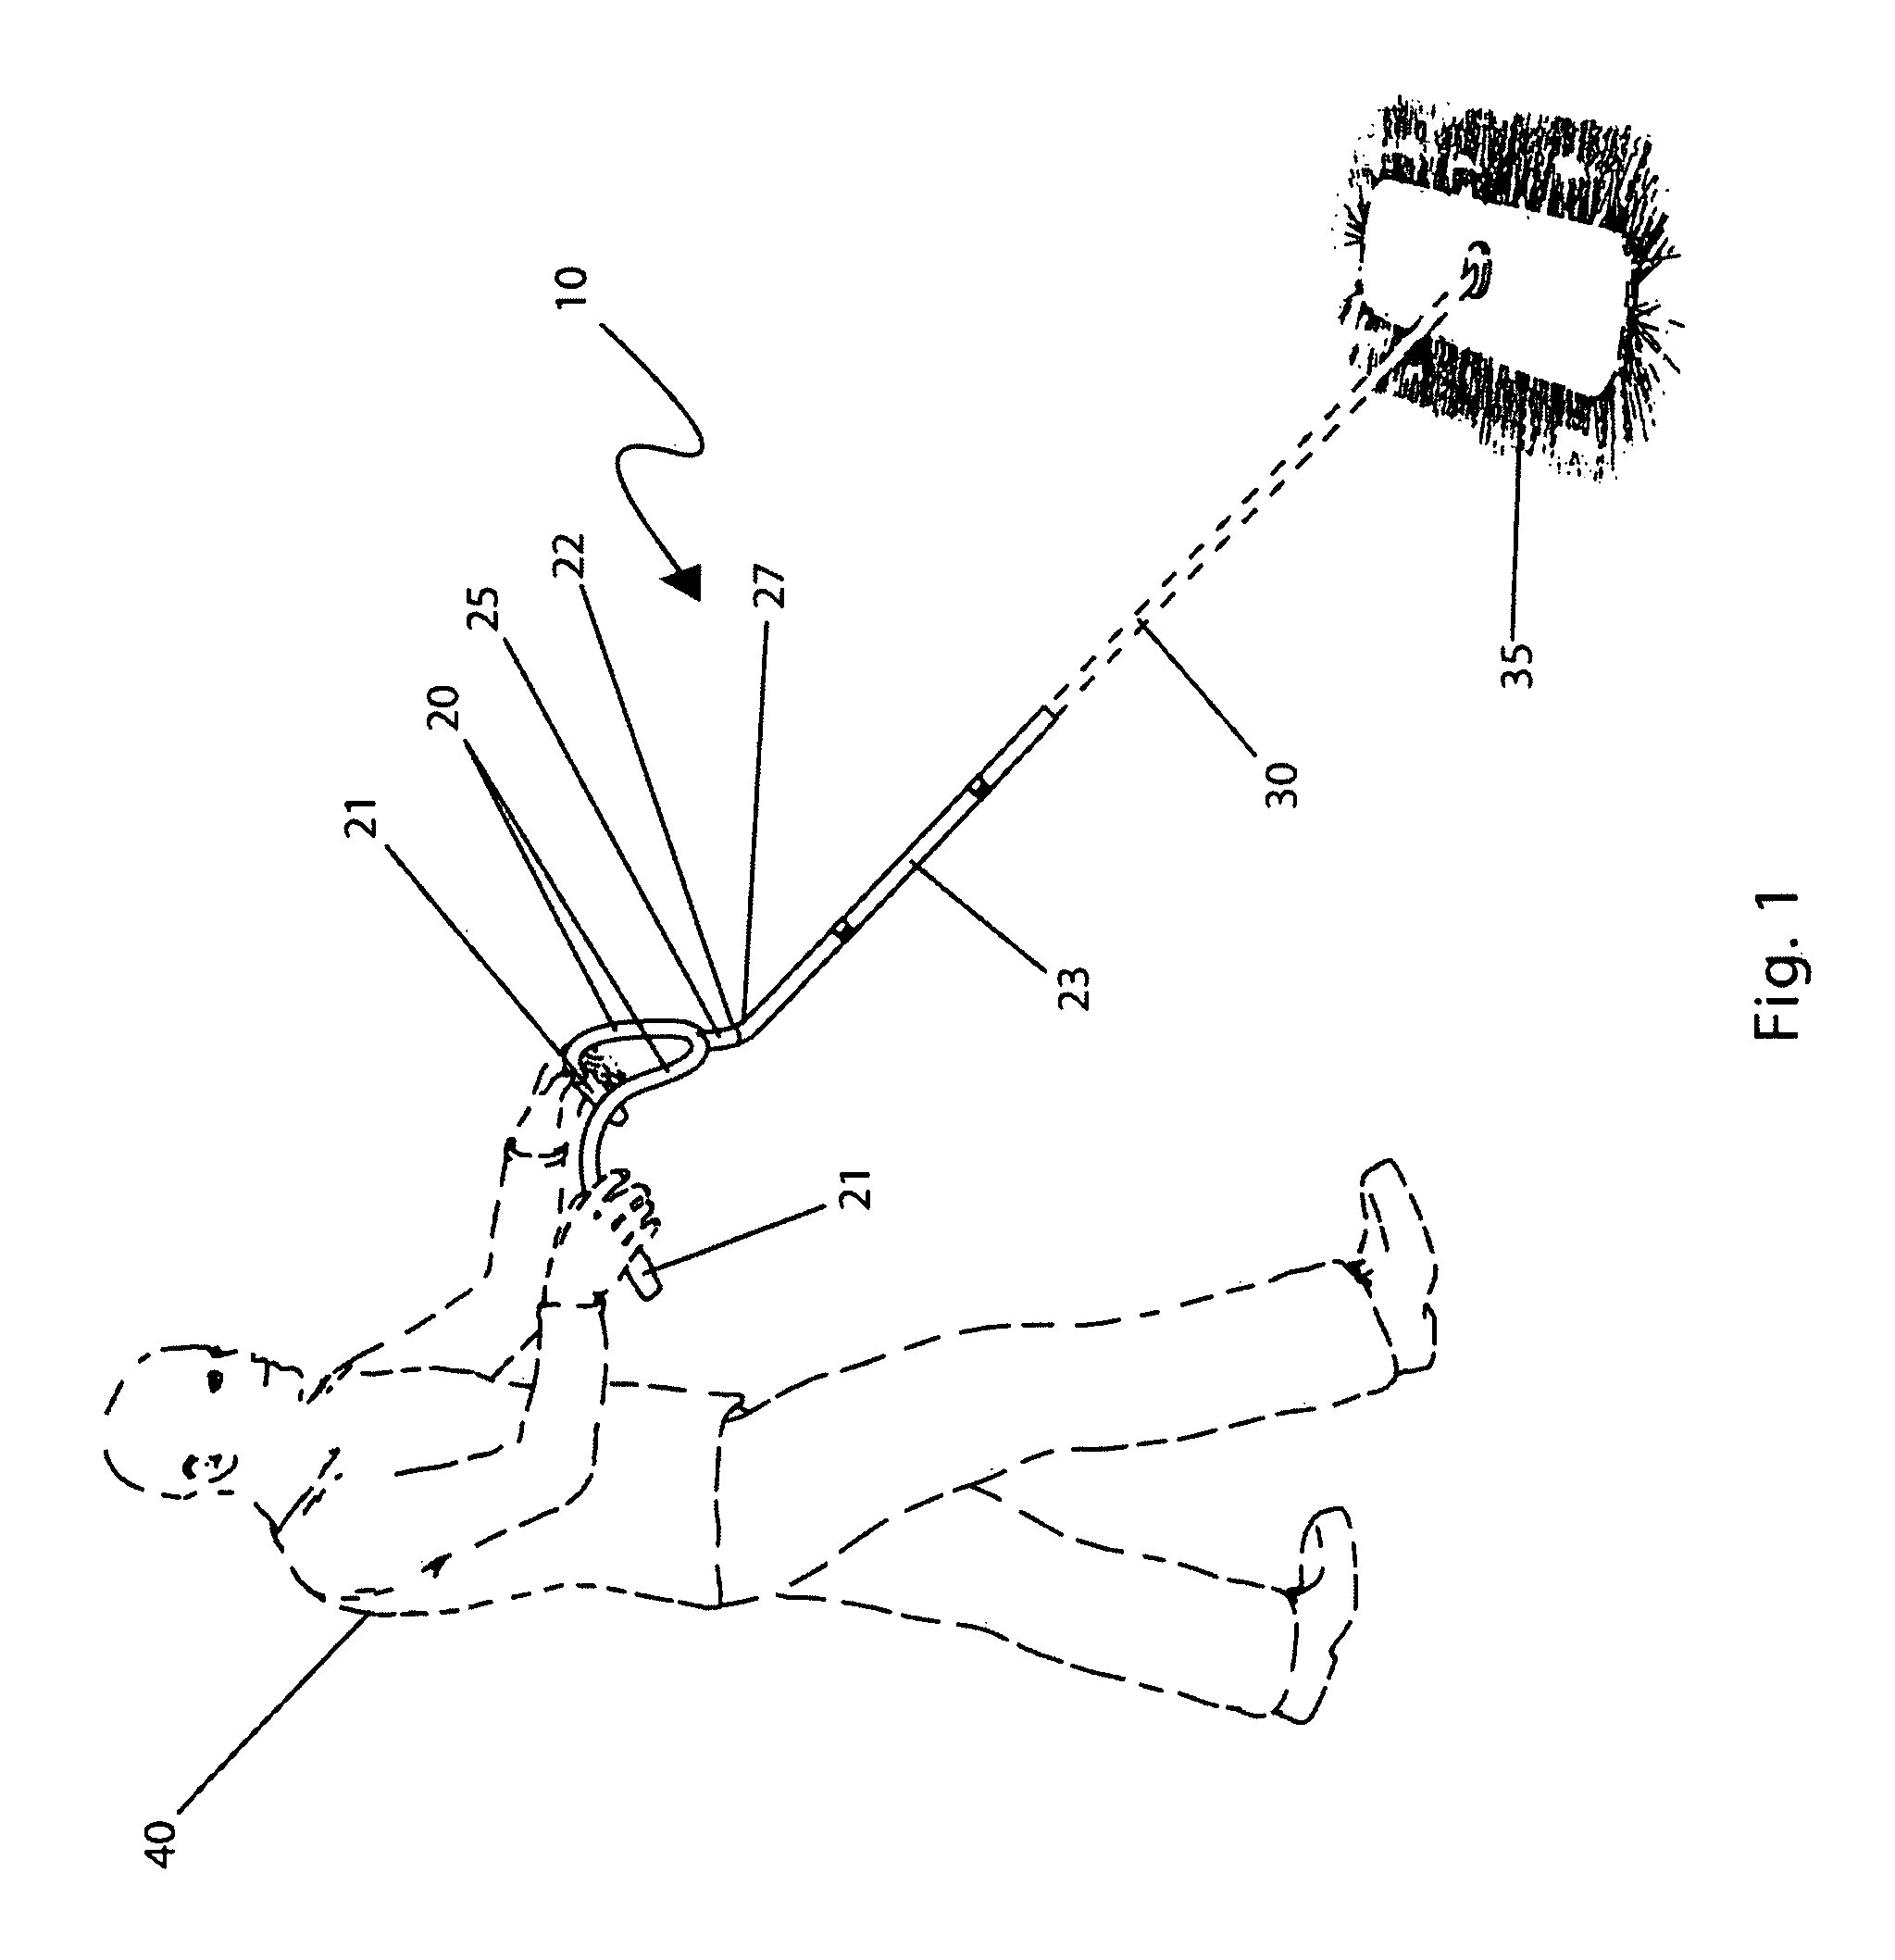 Dual handle attachment for a single handle floor cleaning appliance and conversion method thereof